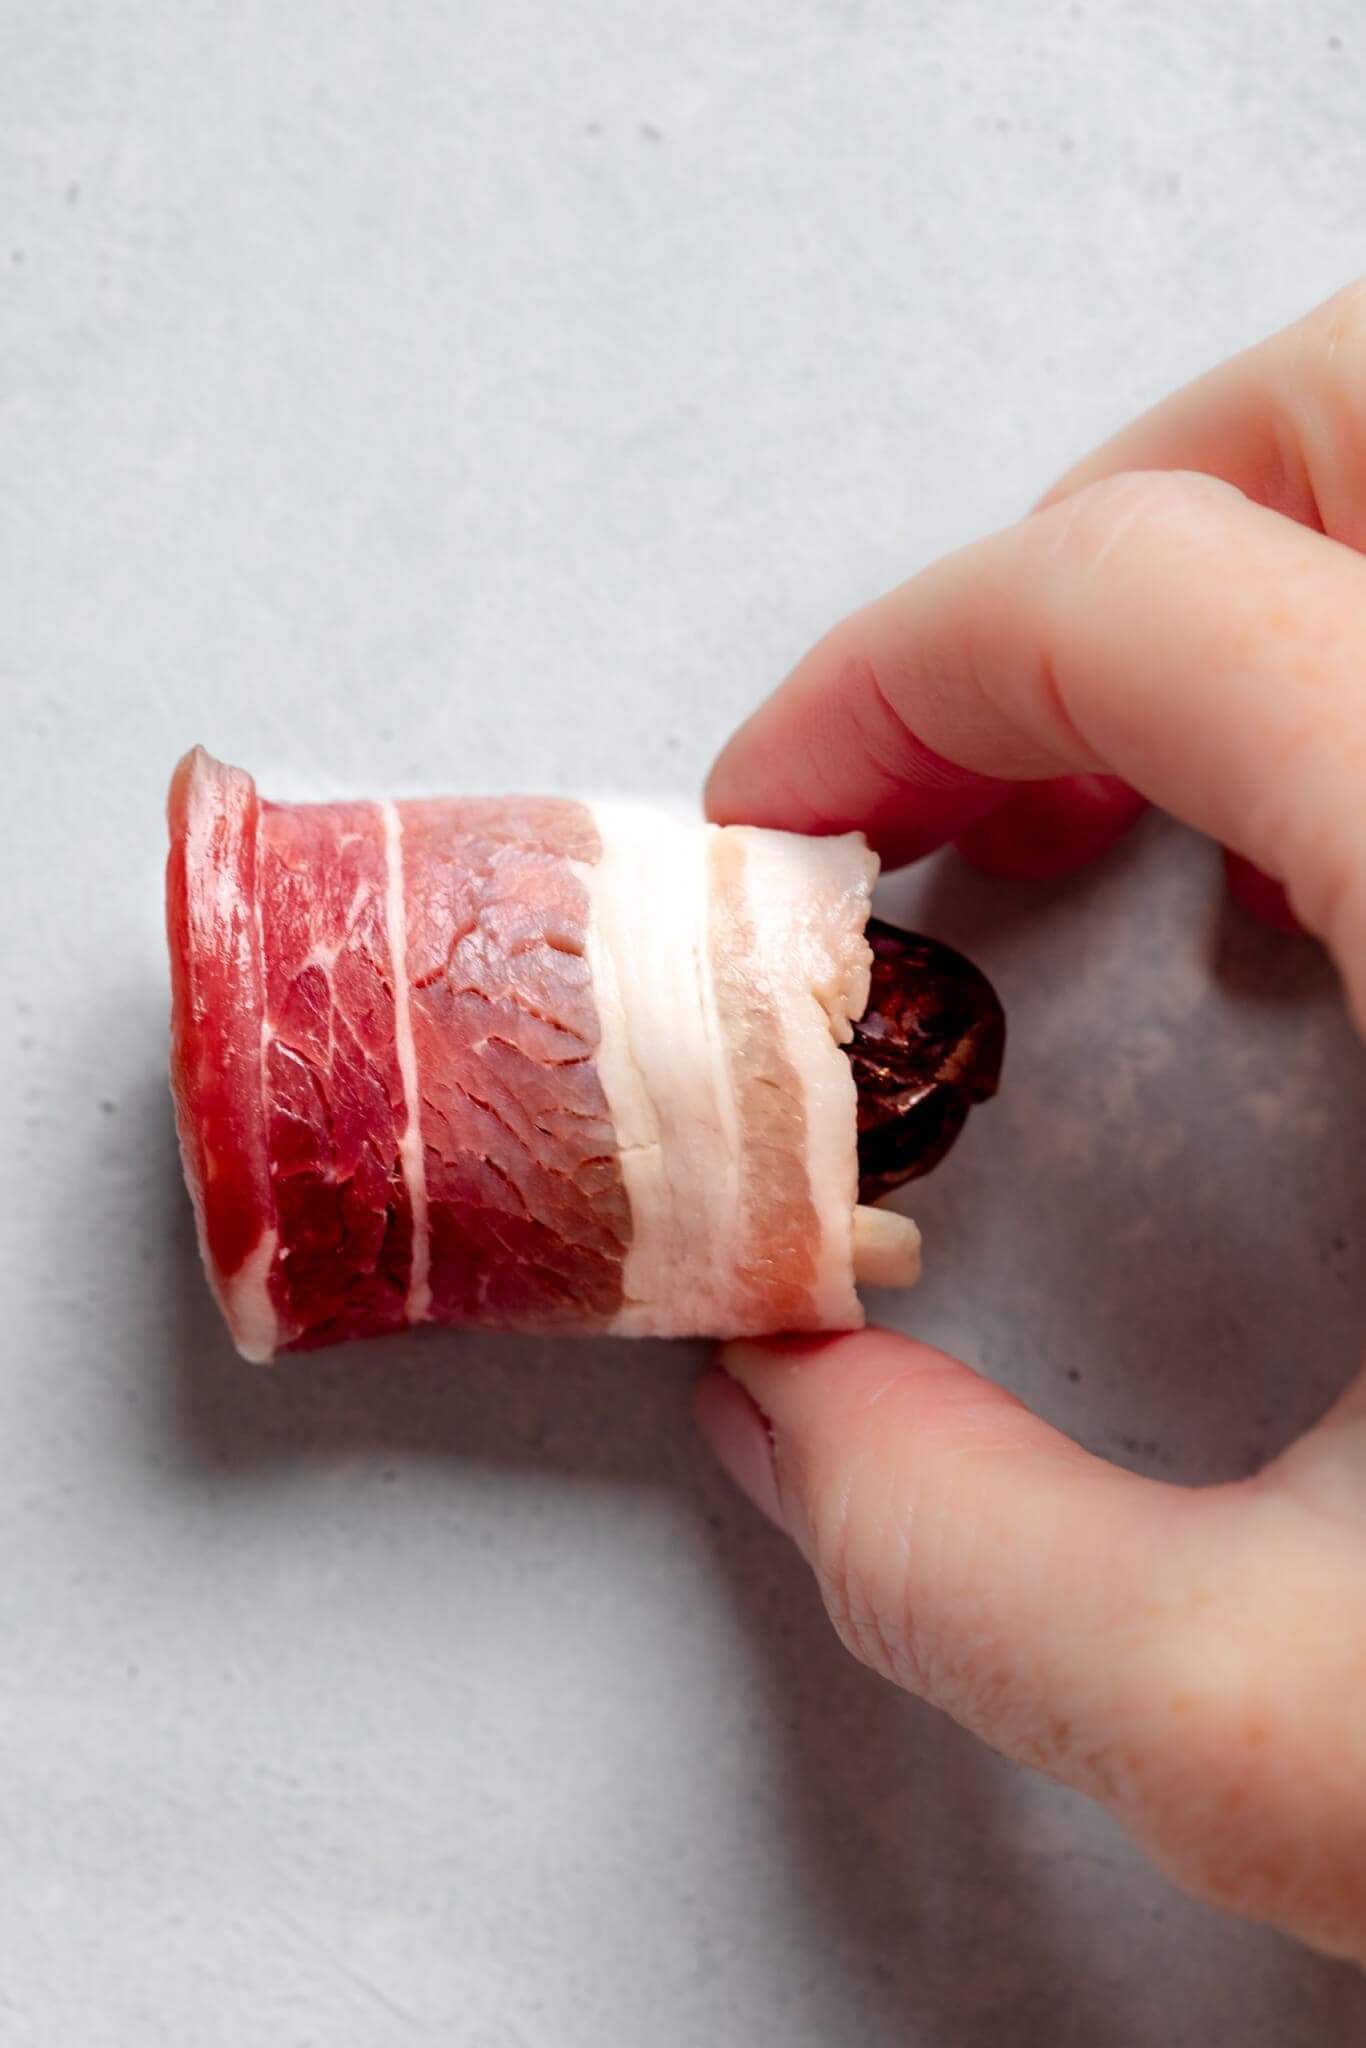 Date wrapped in bacon before baking